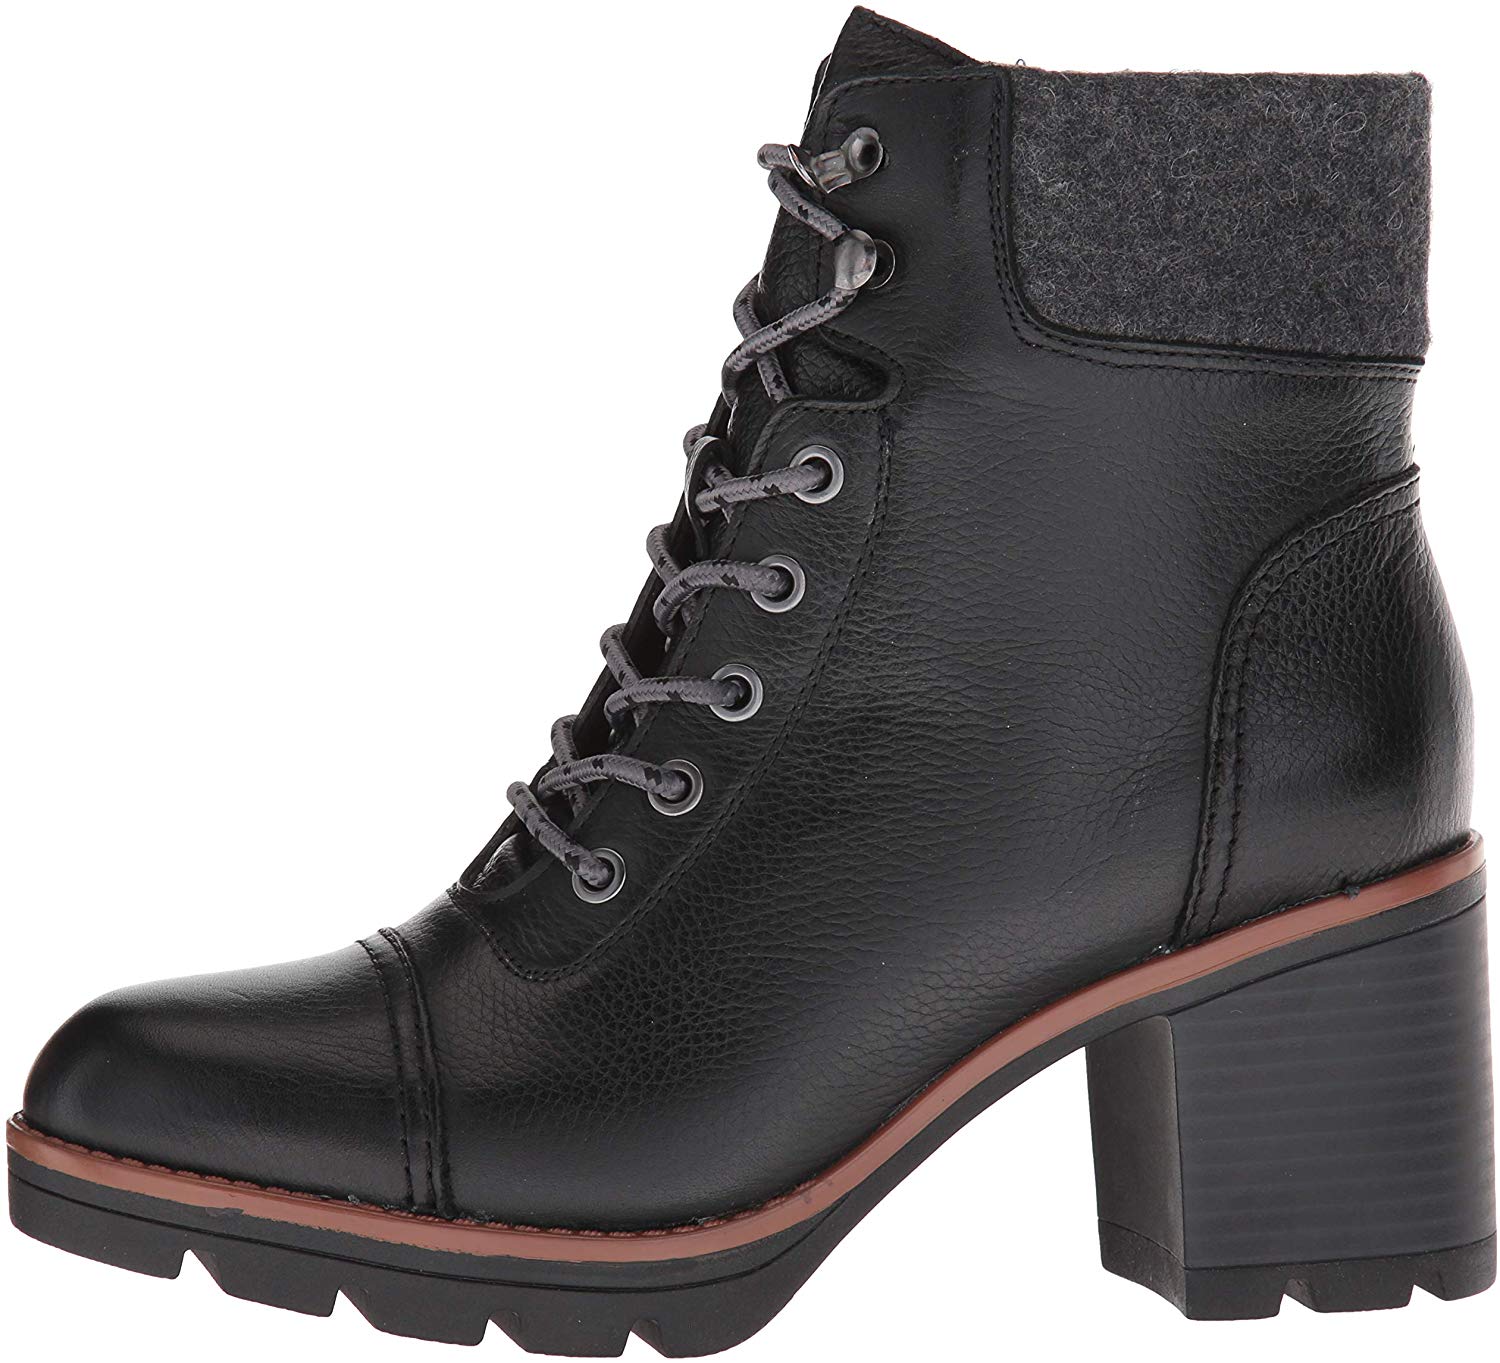 Naturalizer Women's Varuna Booties Ankle Boot, Black Leather, Size 11.0 ...